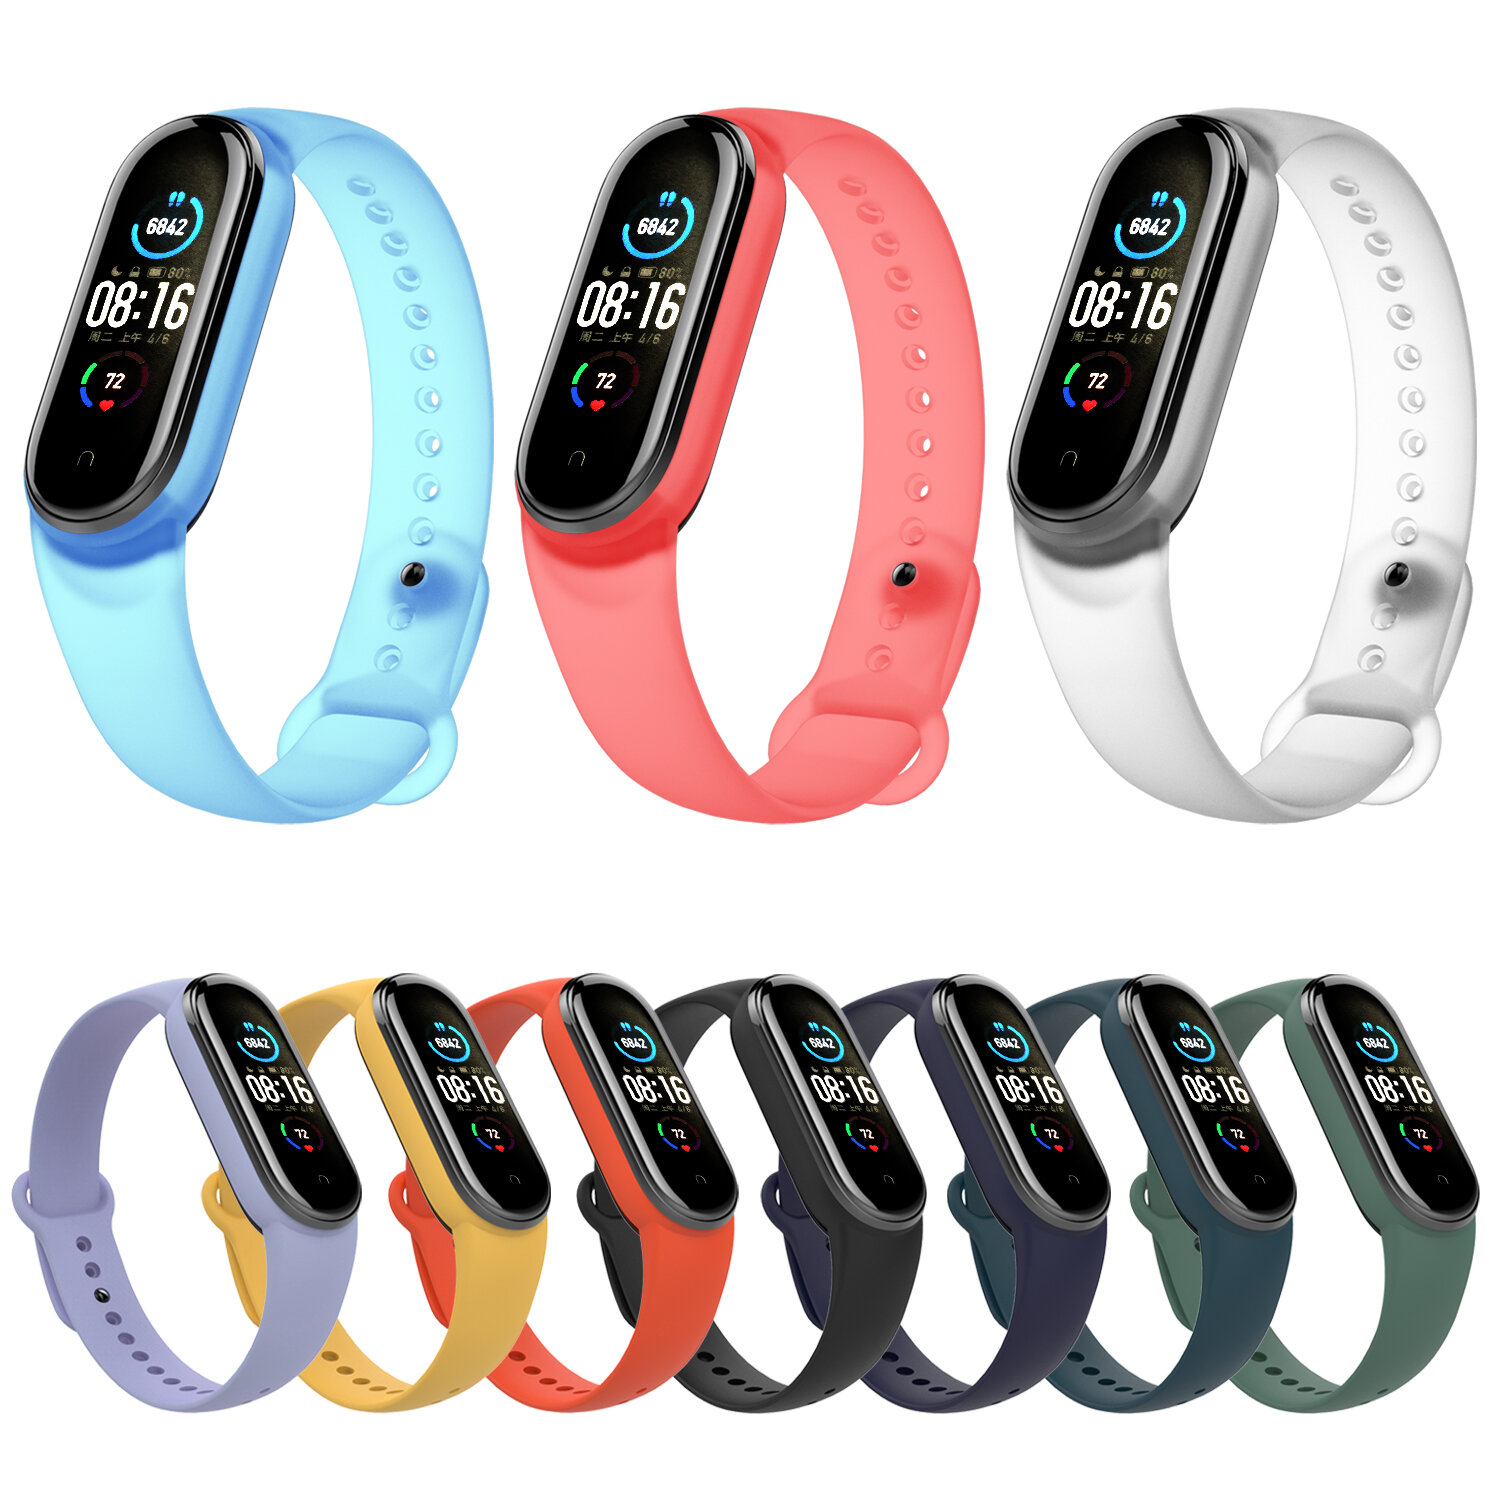 Bakeey transparent watch band watch strap replacement for xiaomi miband 5 mi band 5 non-original